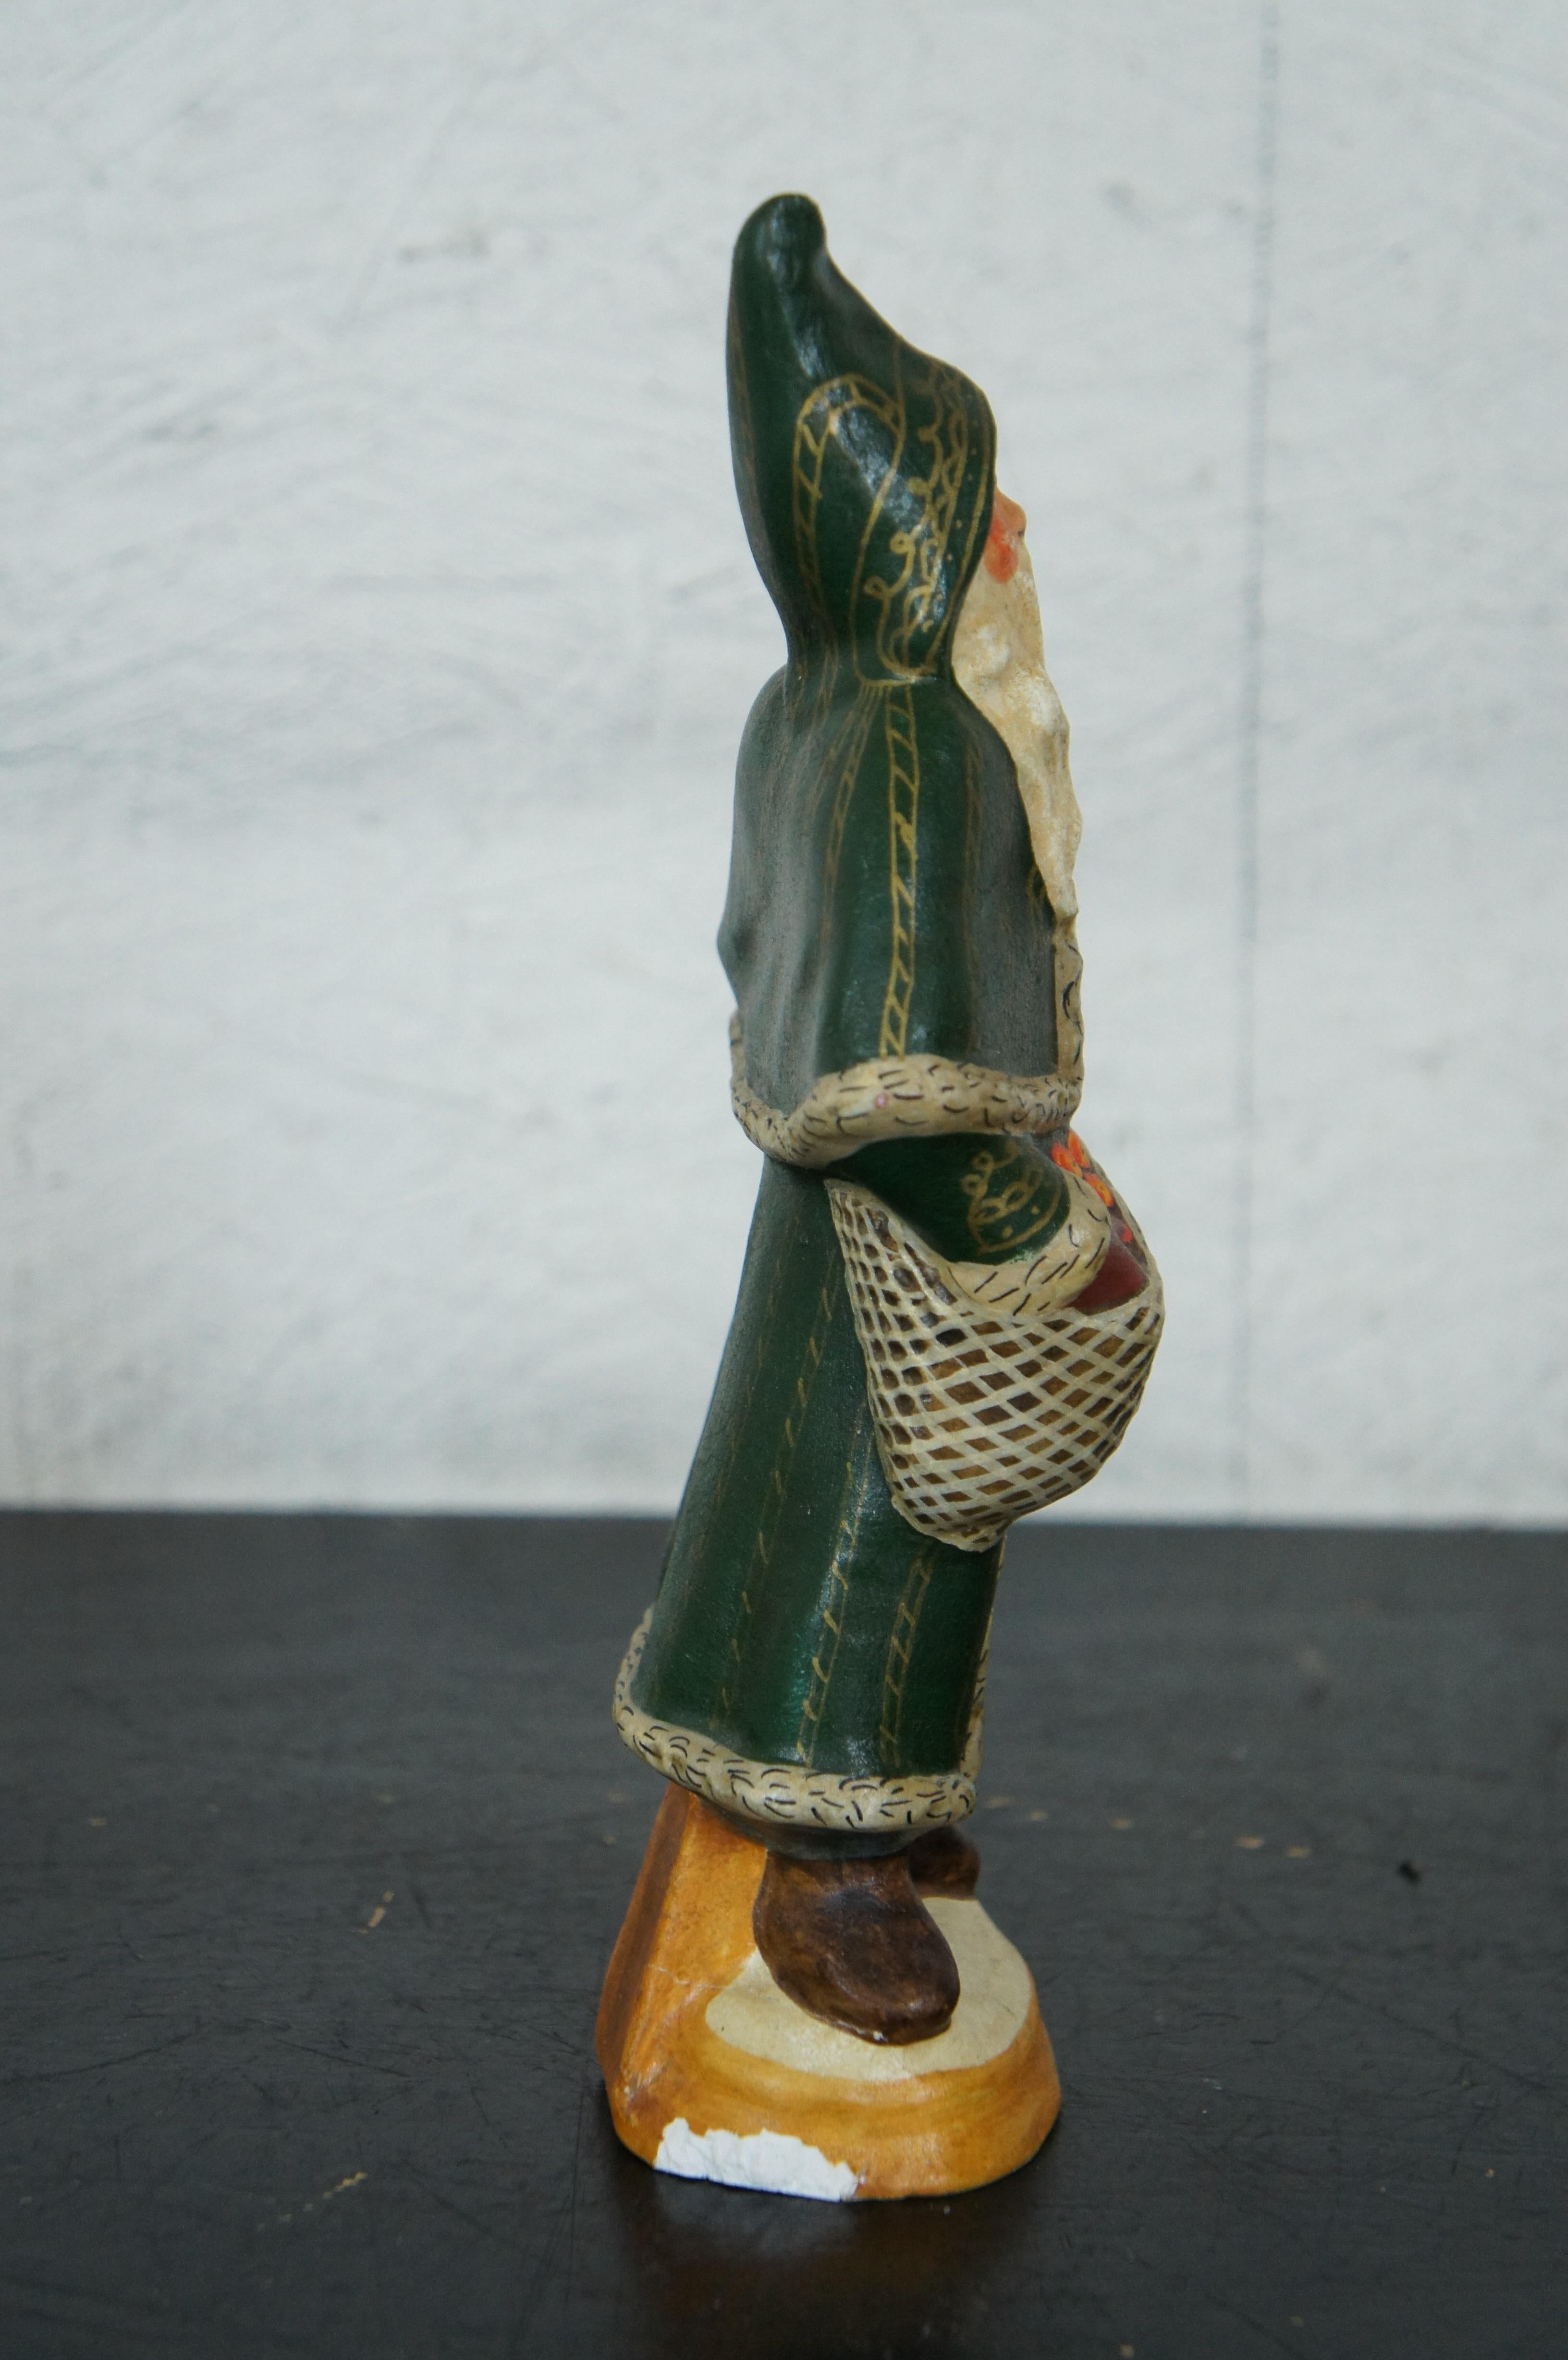 1992 Vaillancourt Folk Art Chalkware Father Christmas Santa Claus #1219 In Good Condition For Sale In Dayton, OH